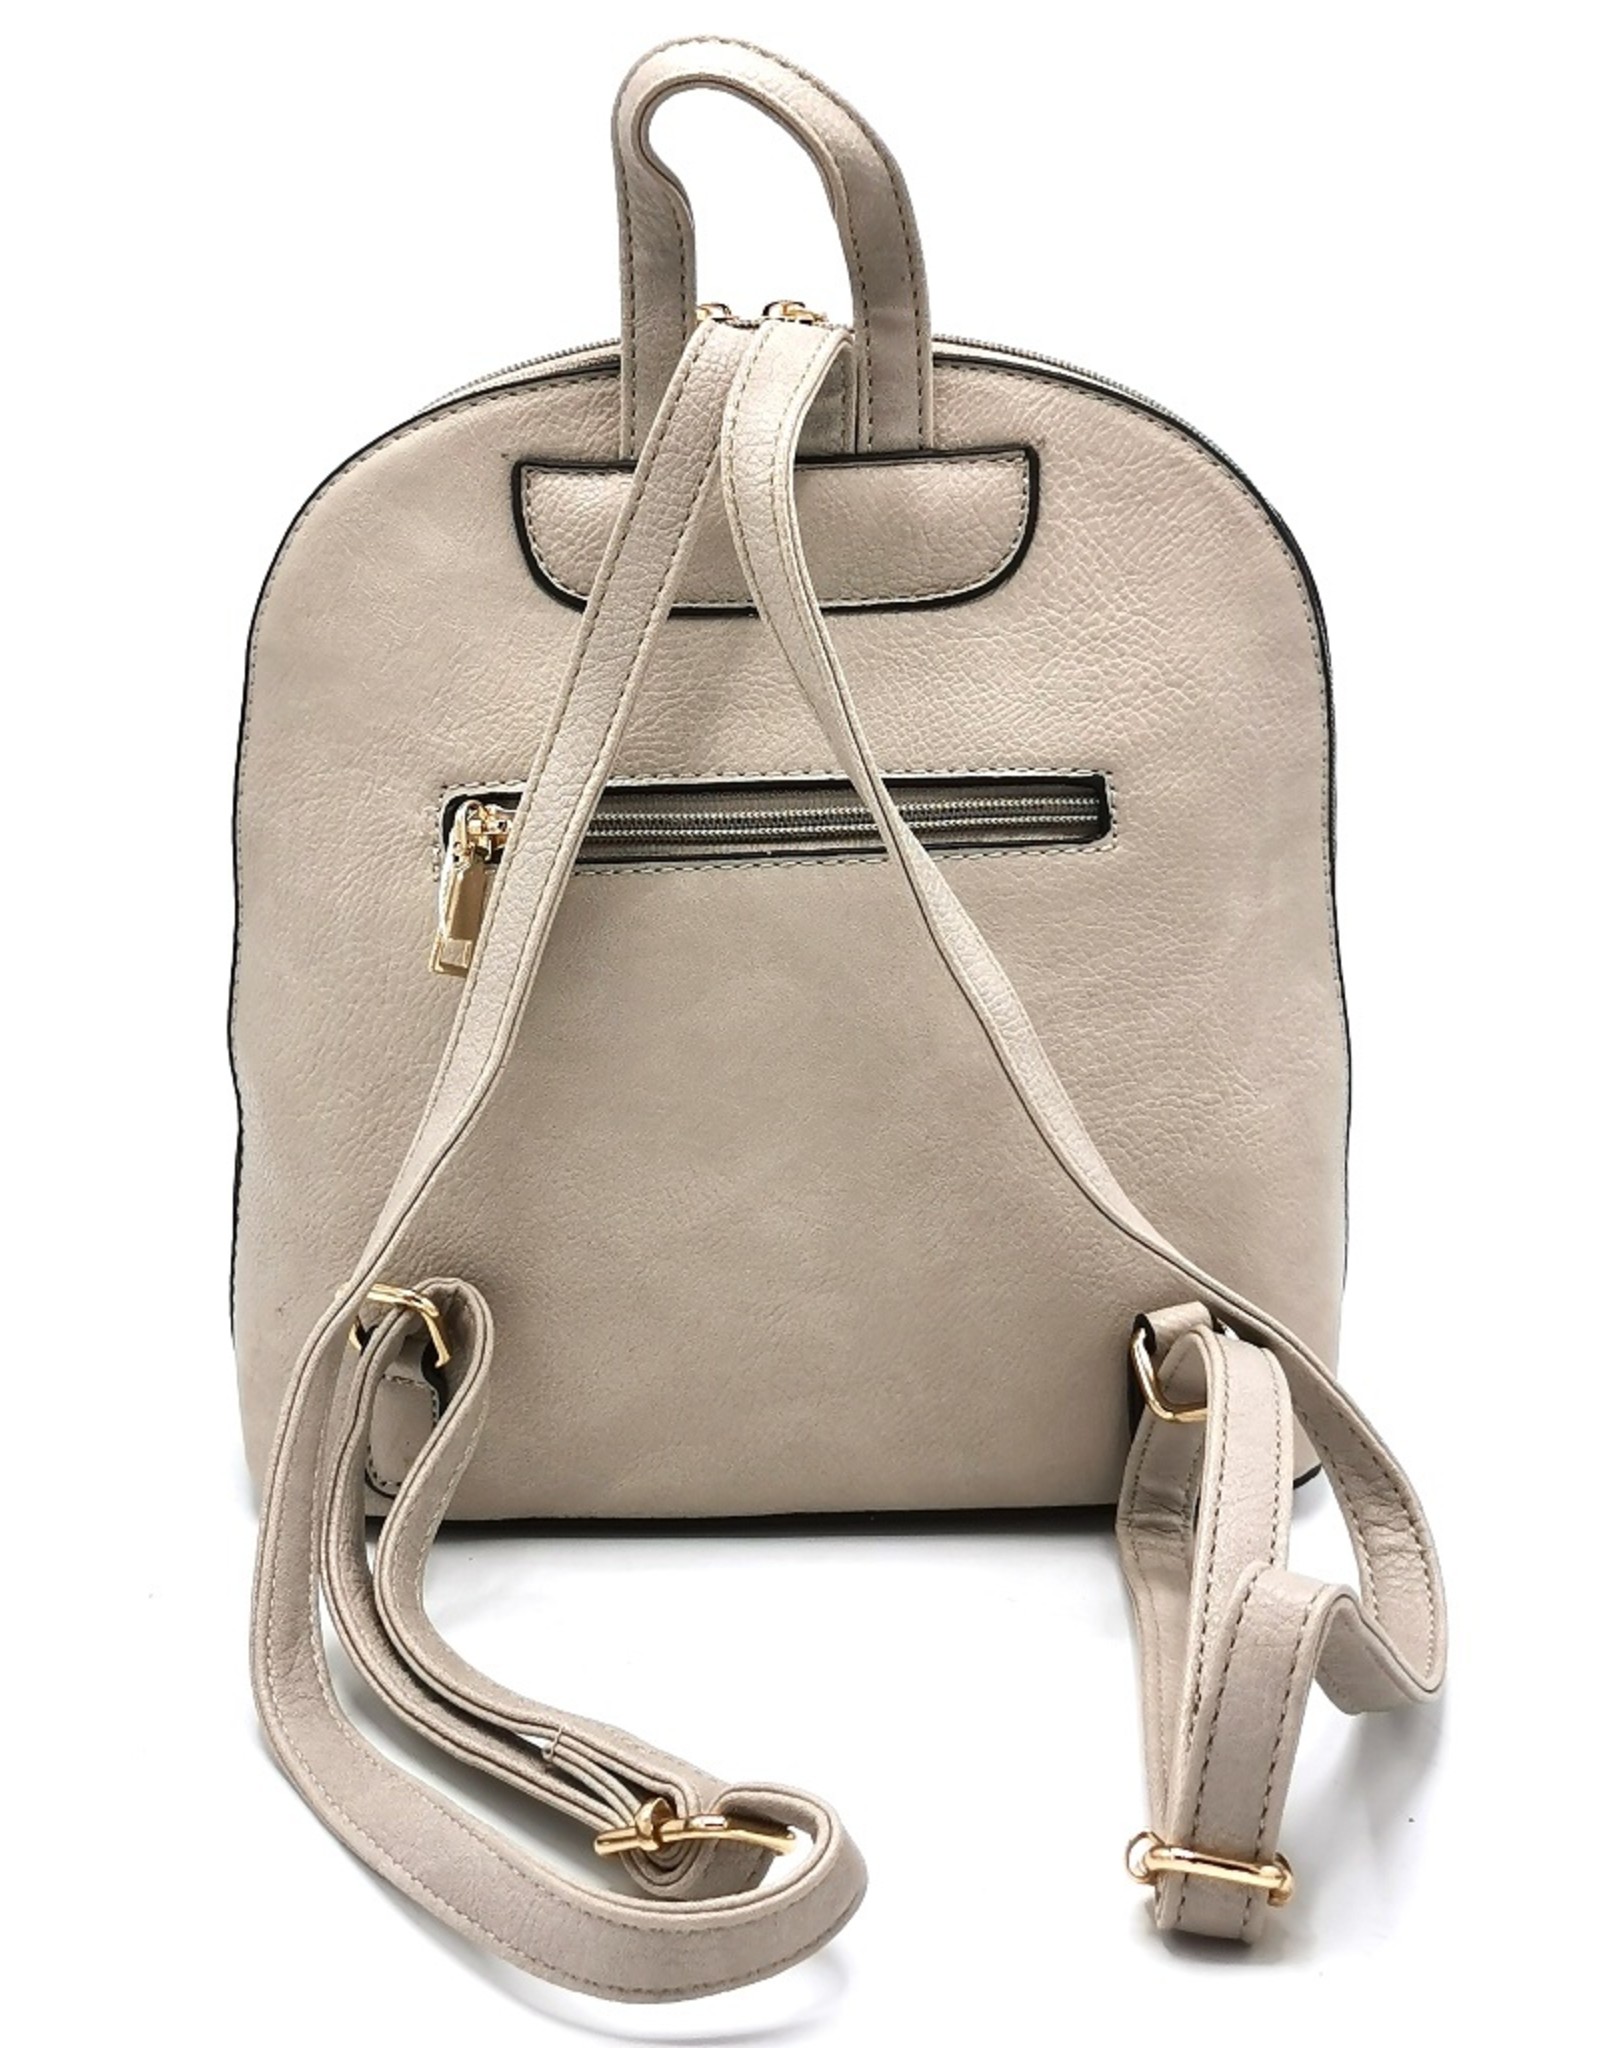 Trukado Backpacks  and fanny packs - Fashion backpack with holographic accents beige